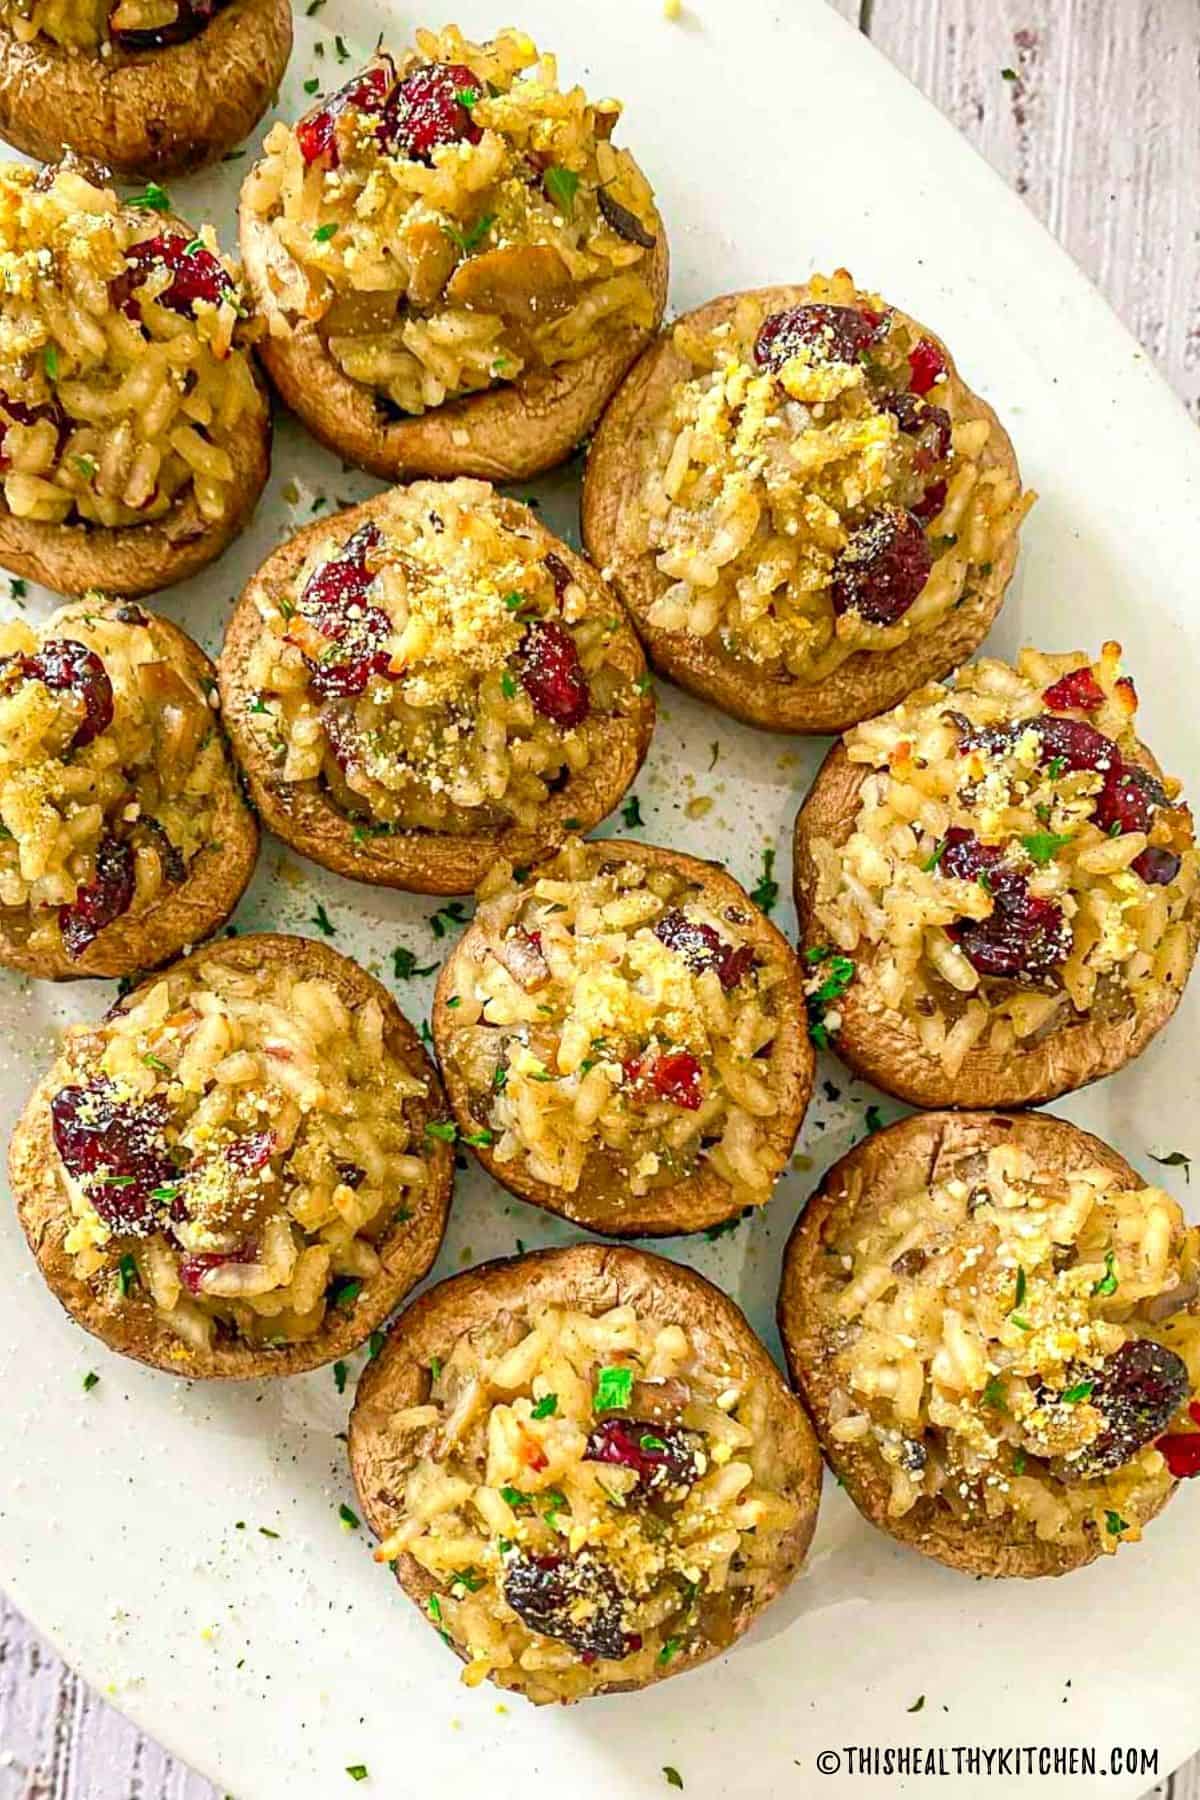 Stuffed mushrooms with risotto, cranberries and parsley on top.